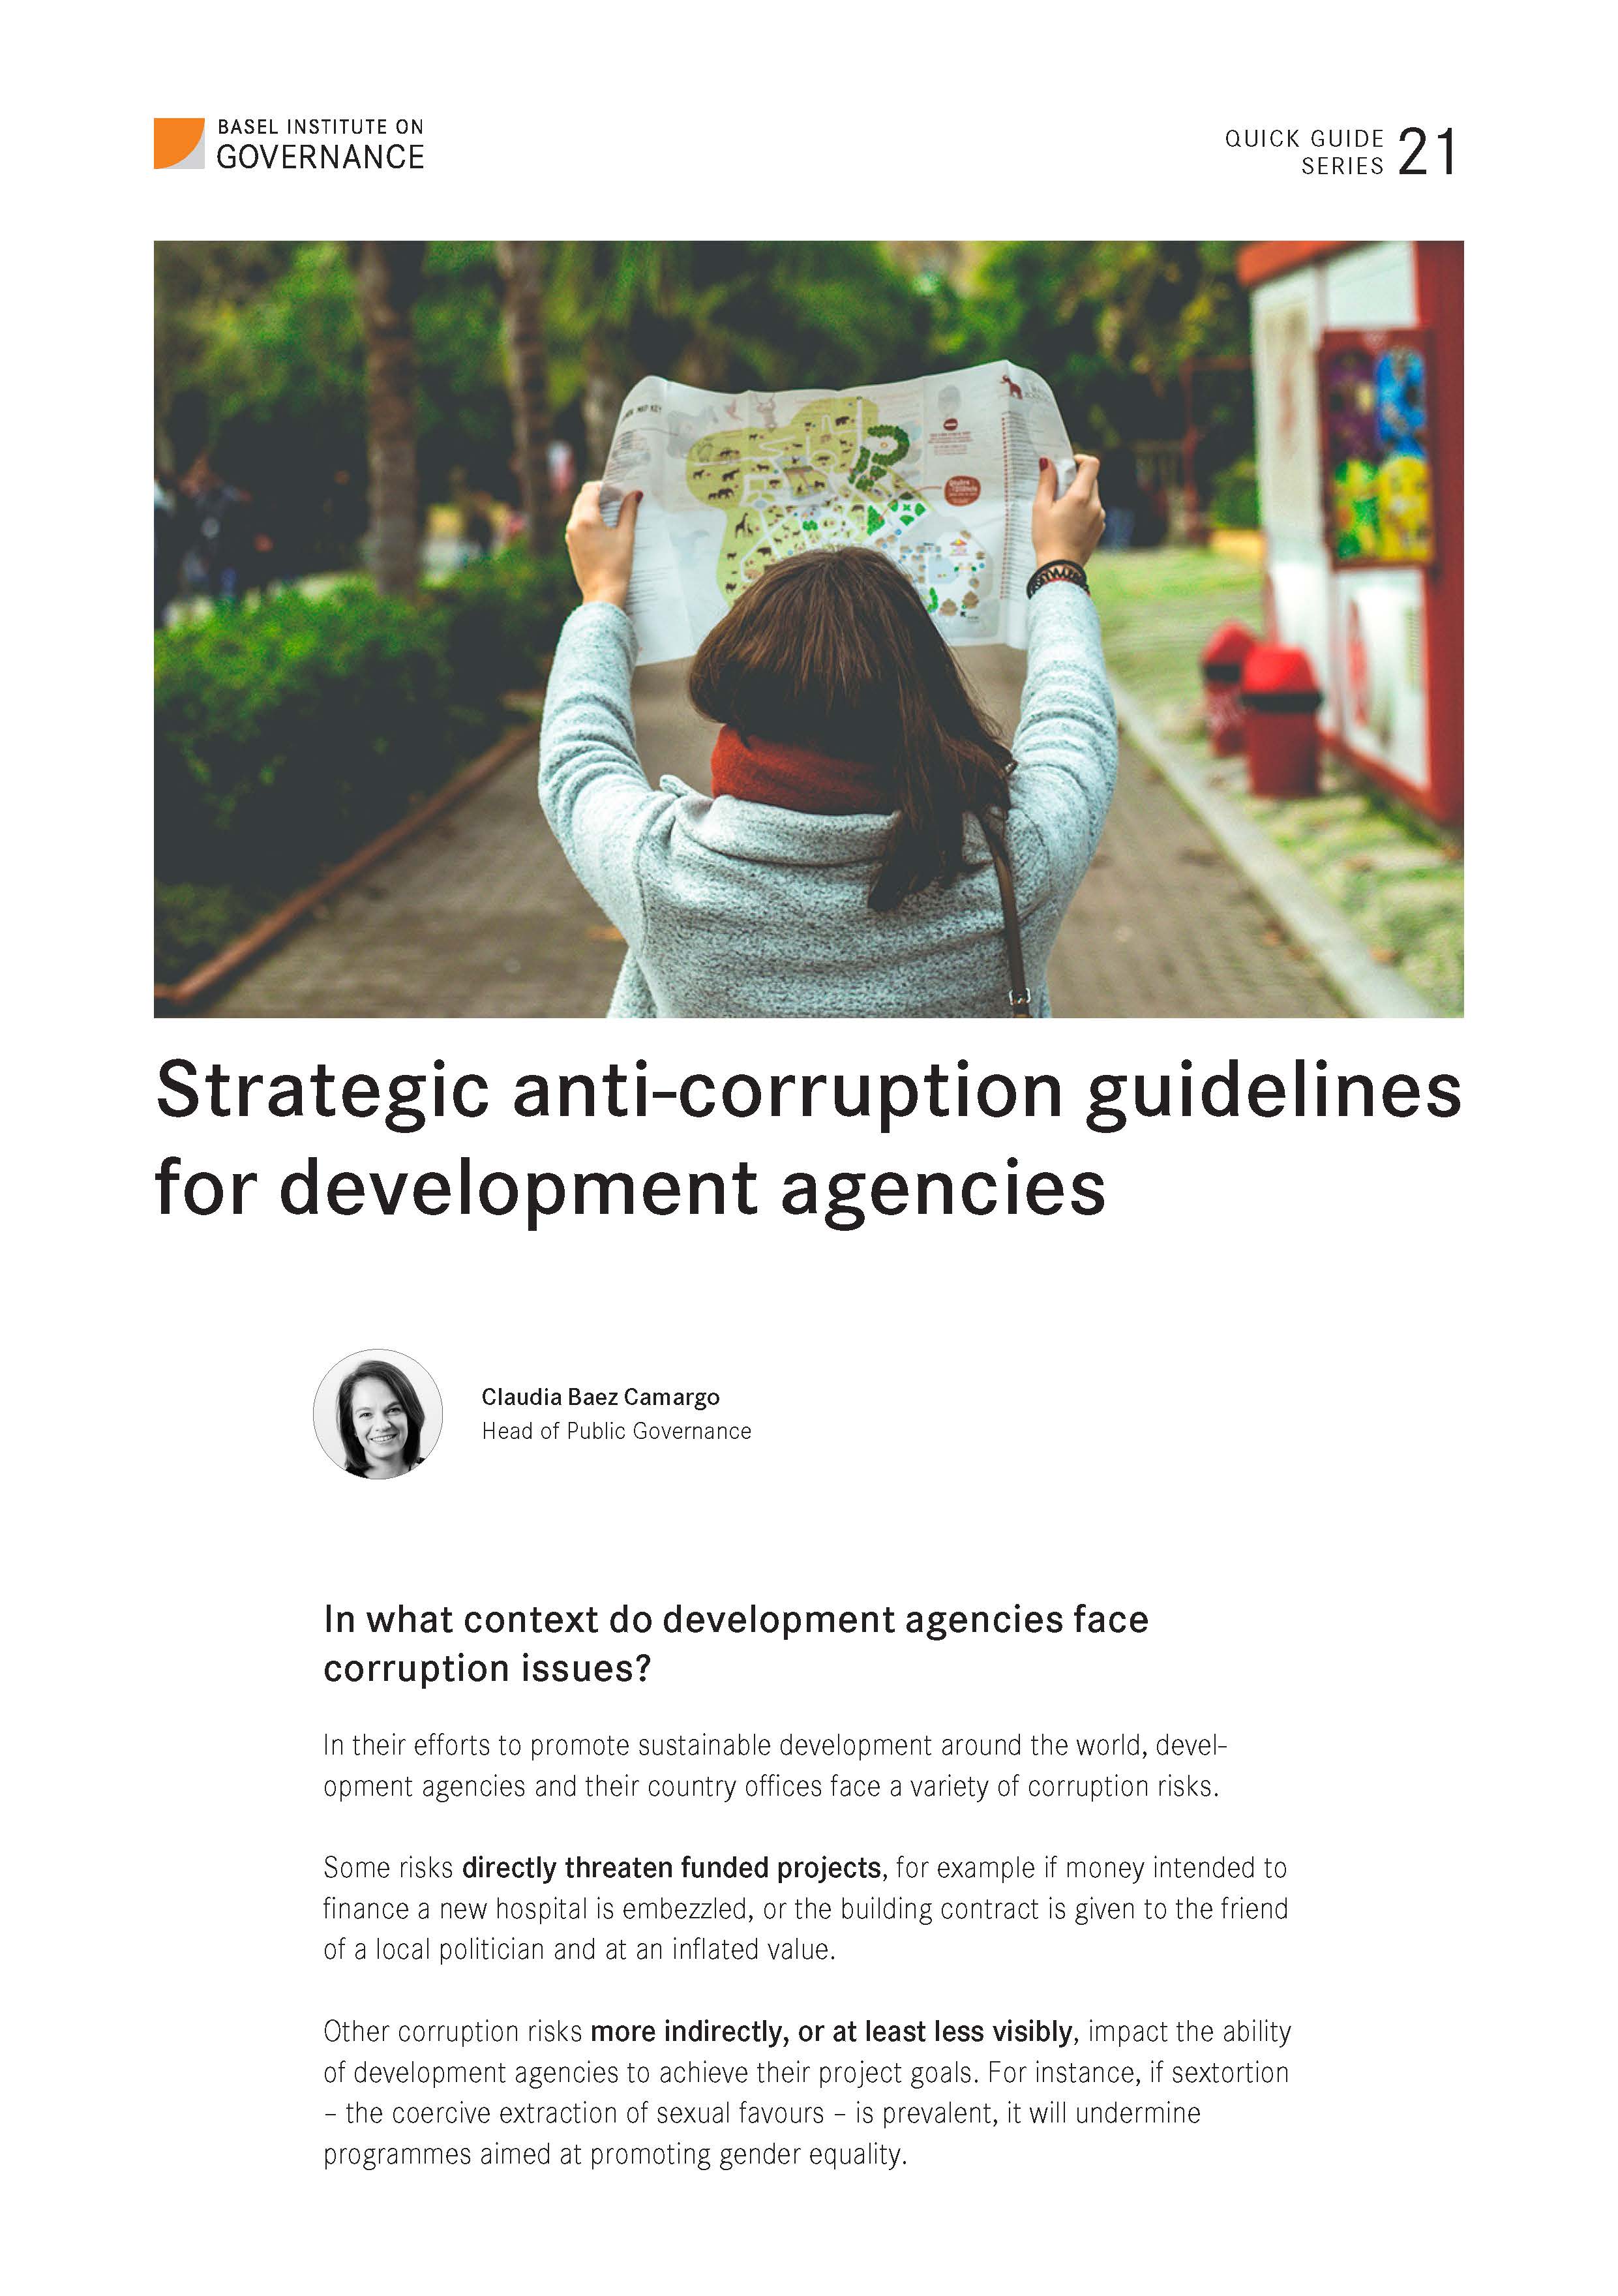 Cover page of quick guide to strategic anti-corruption guidelines for development agencies